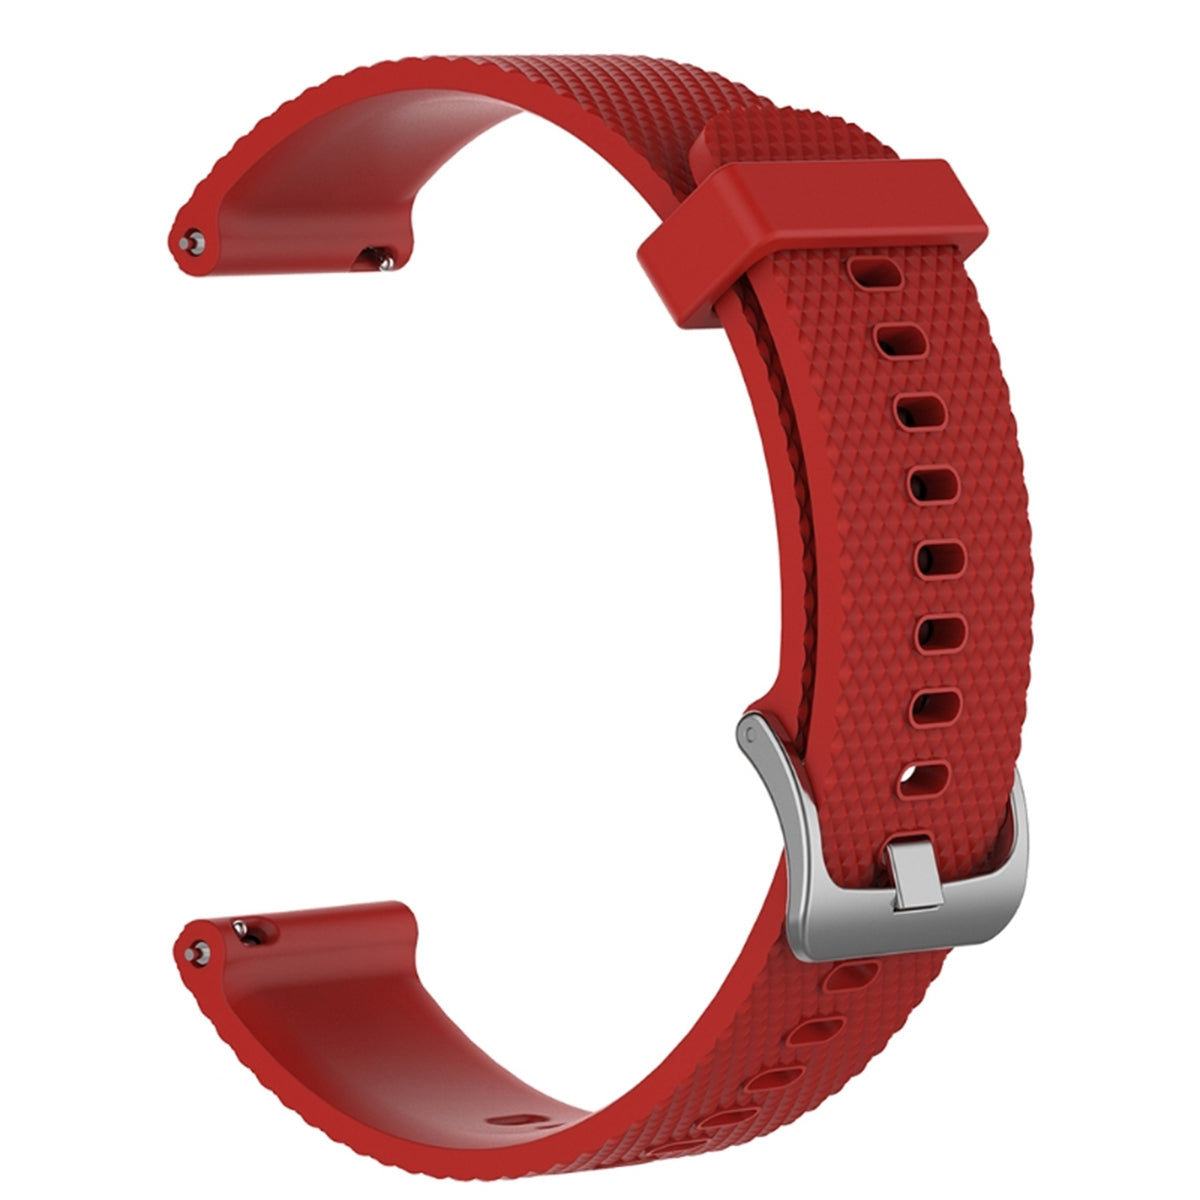 Garmin Vivoactive 3 Vivomove HR Forerunner 645 Replacement Bands Strap (20mm) Small Red 